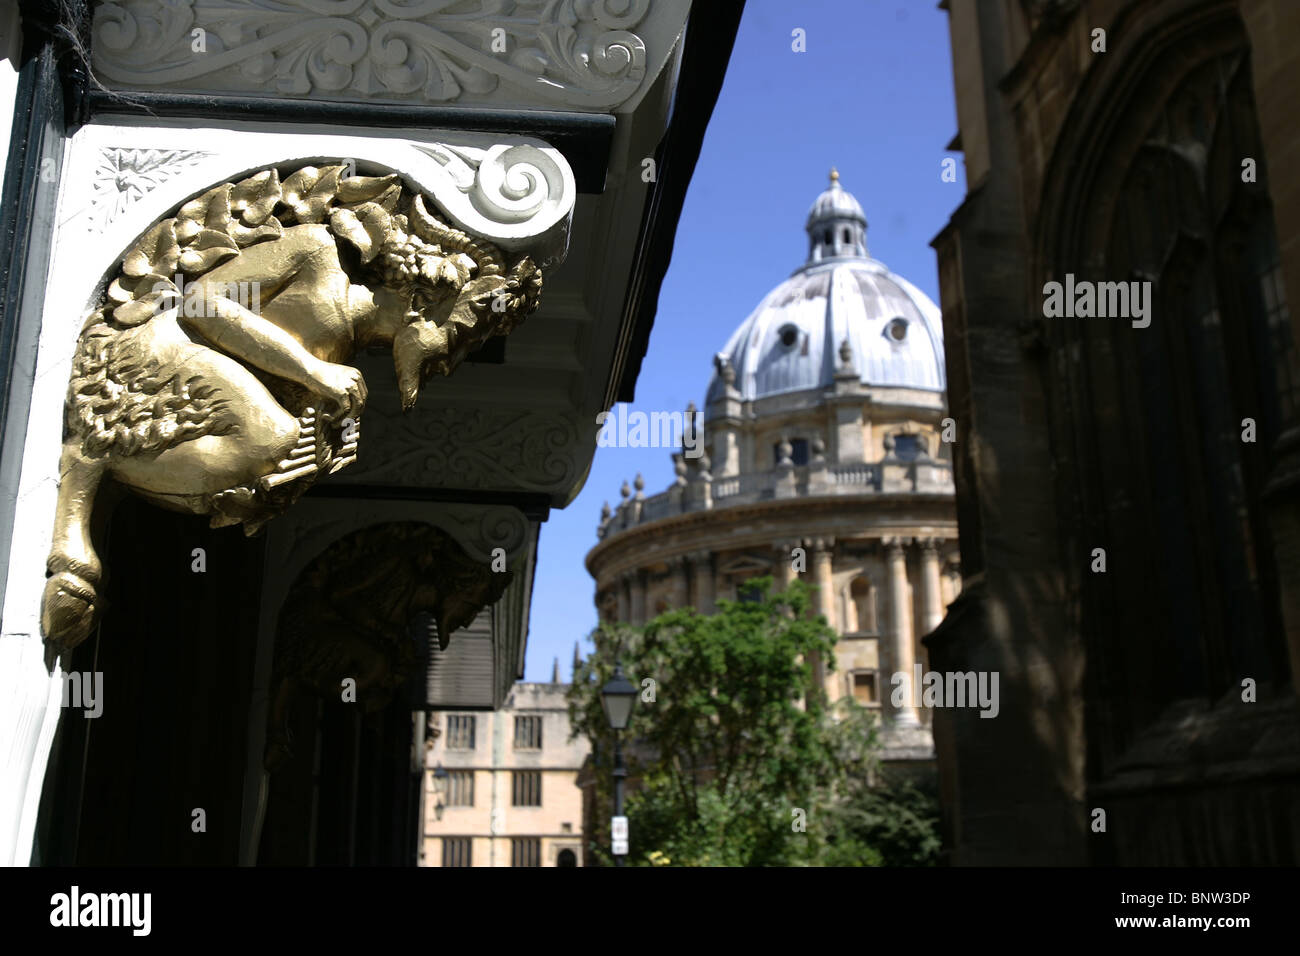 A glimpse of the Radcliffe Camera through a passage from the Oxford High Street. Stock Photo